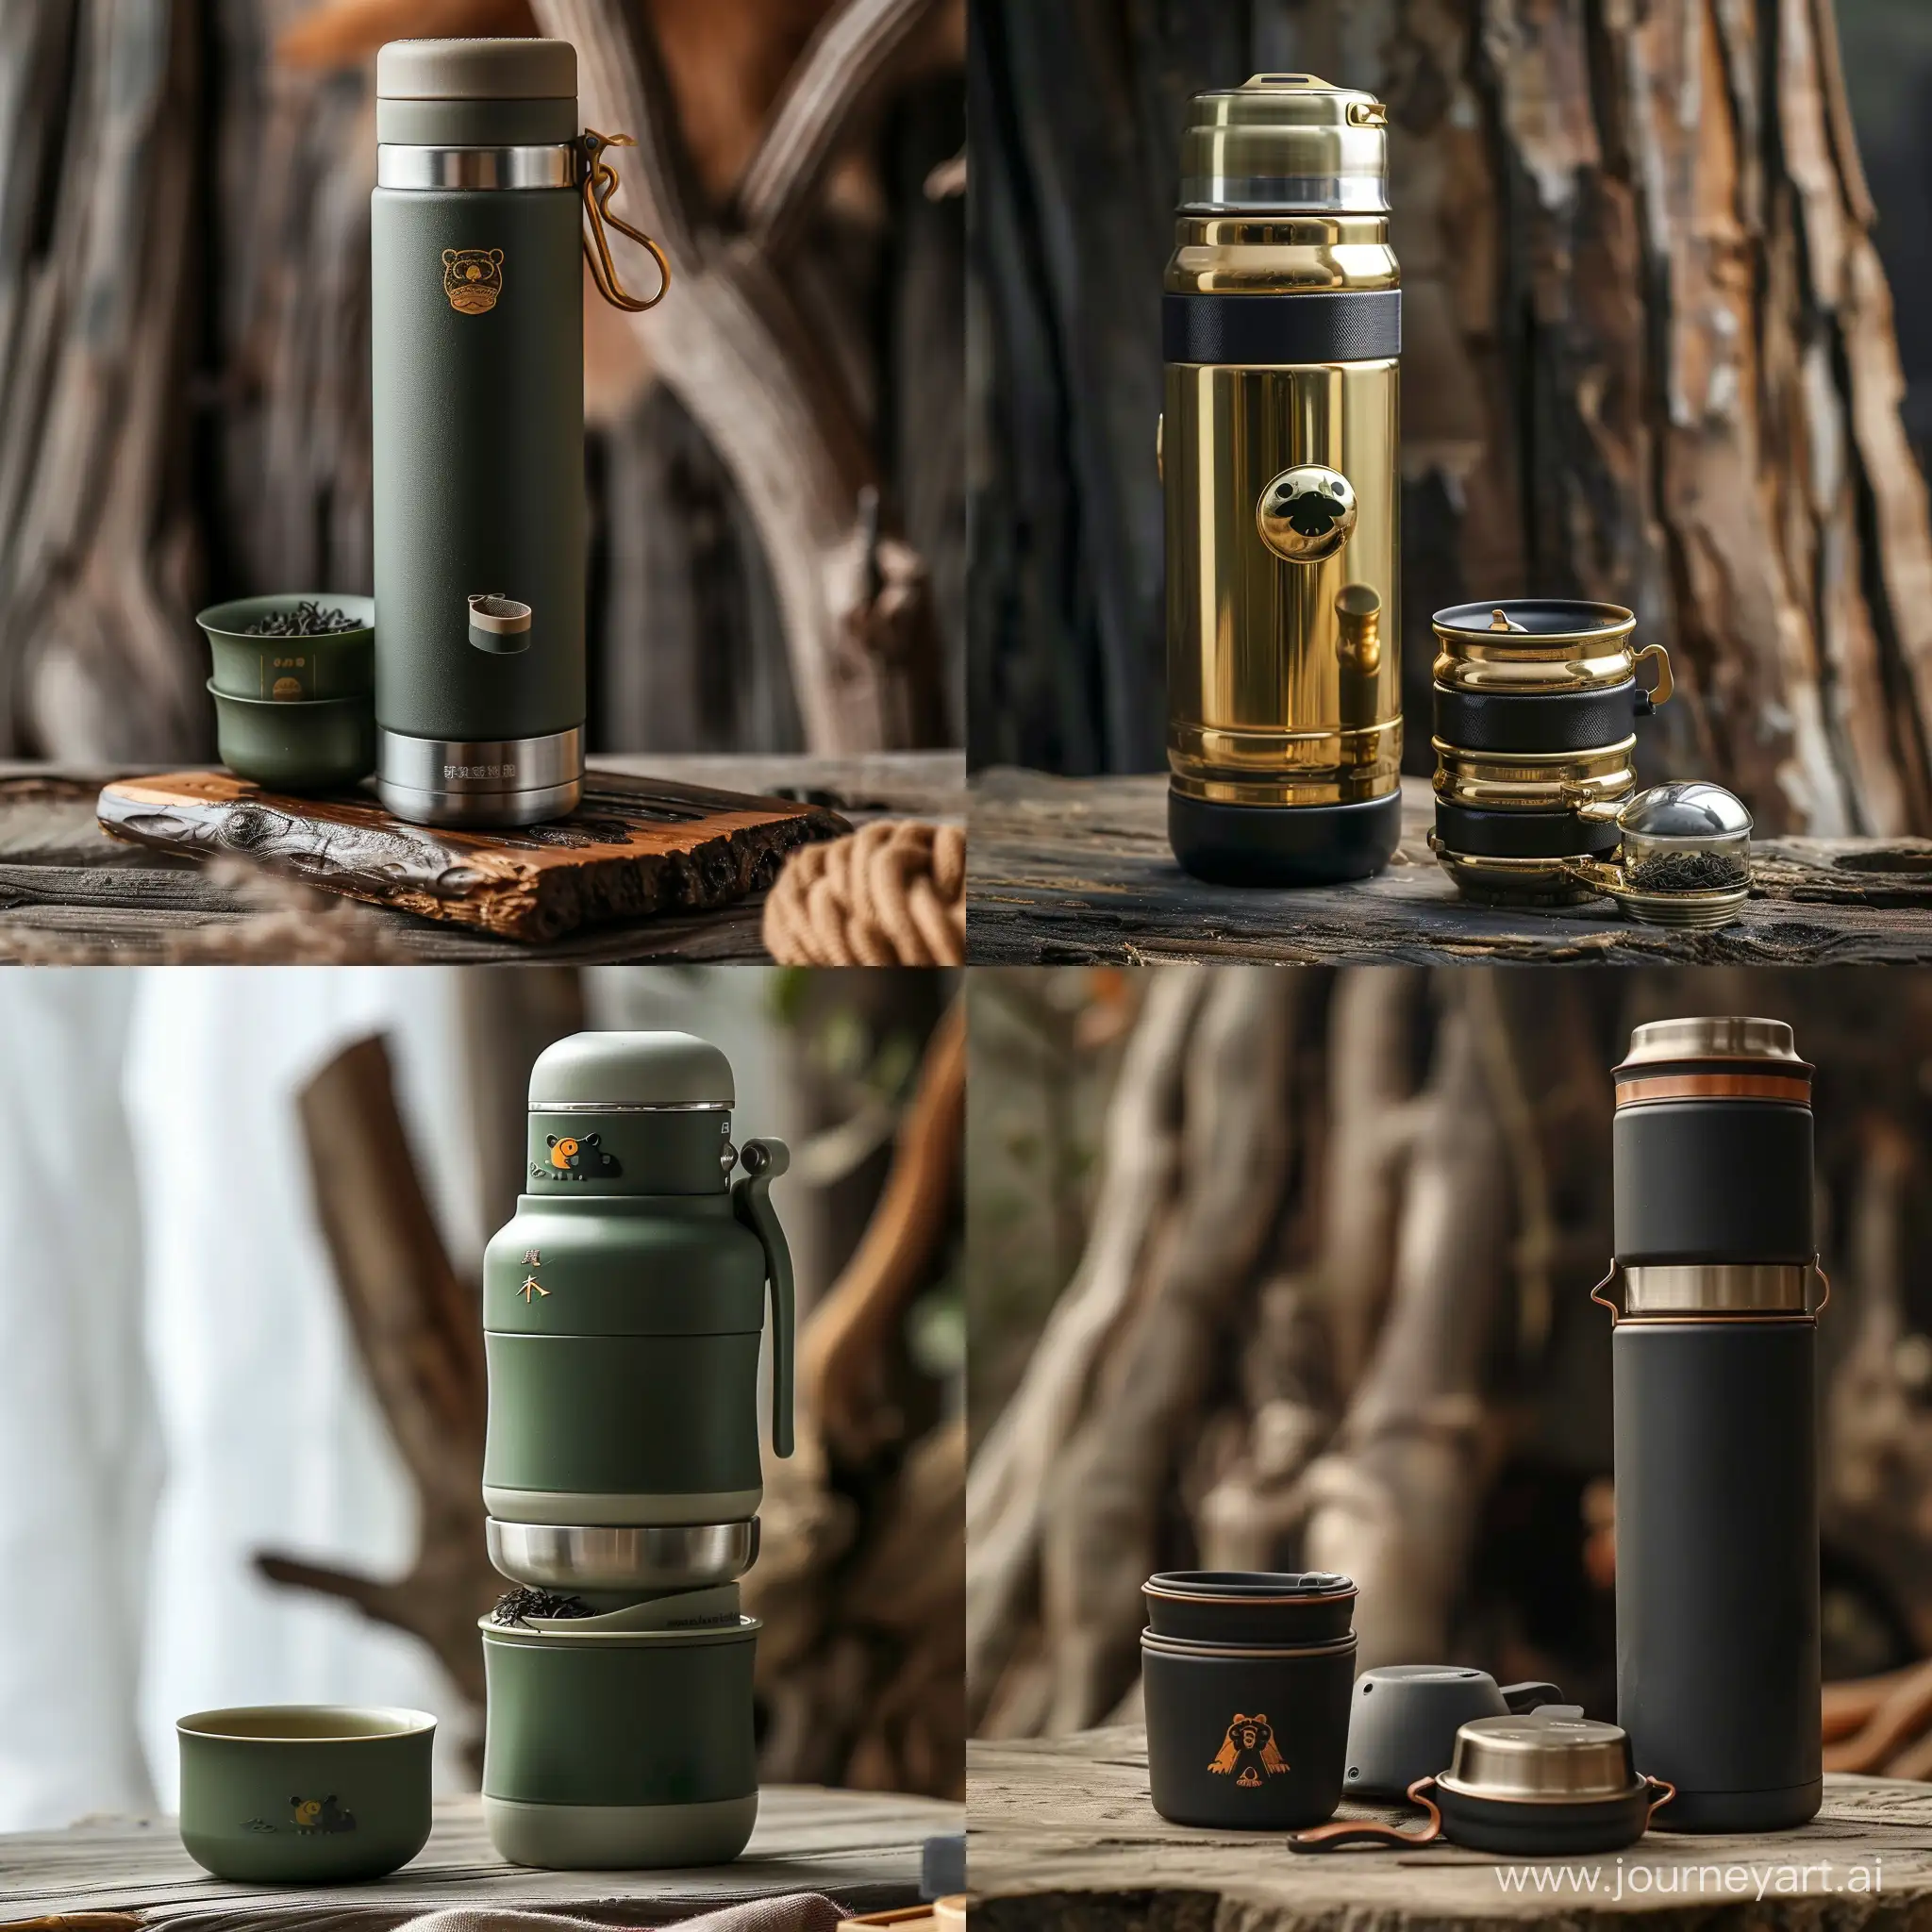 Taiwanese-Black-Bear-Themed-Stainless-Steel-Camping-Tea-Set-with-Stackable-Cups-and-Tea-Leaf-Compartment